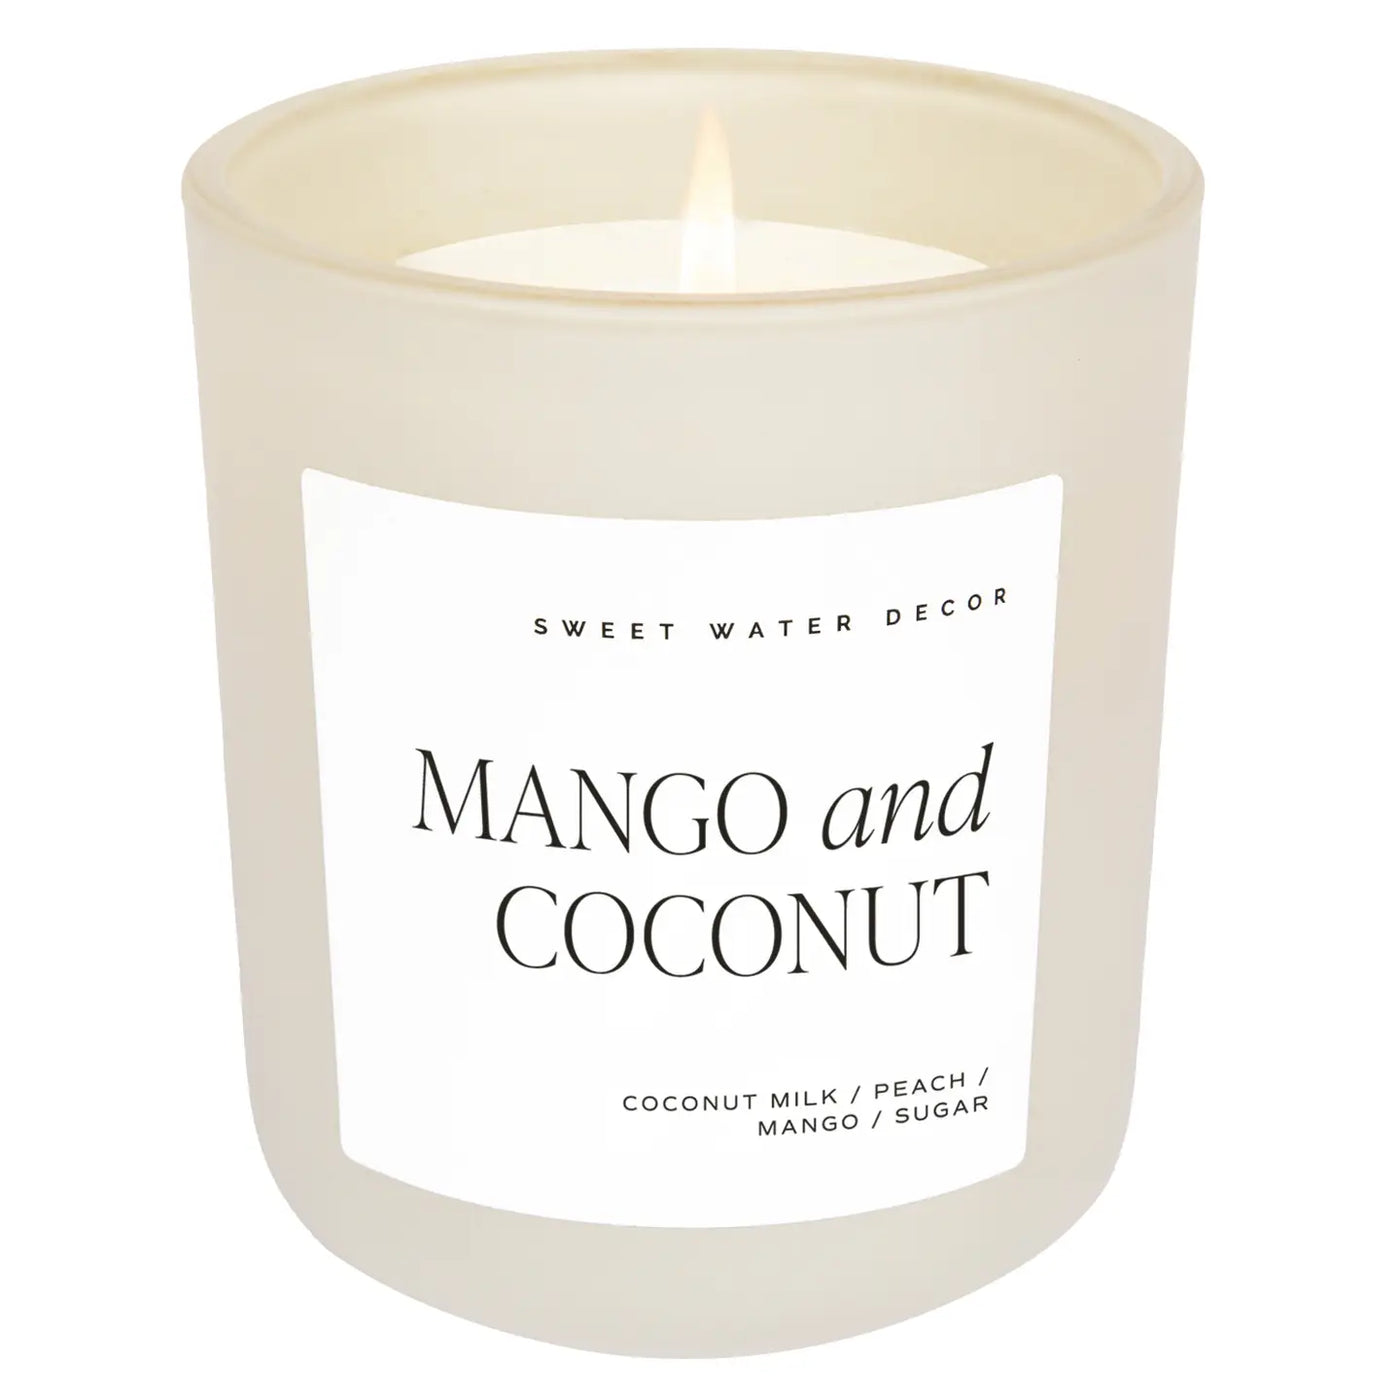 MANGO AND COCONUT 15OZ SOY CANDLE